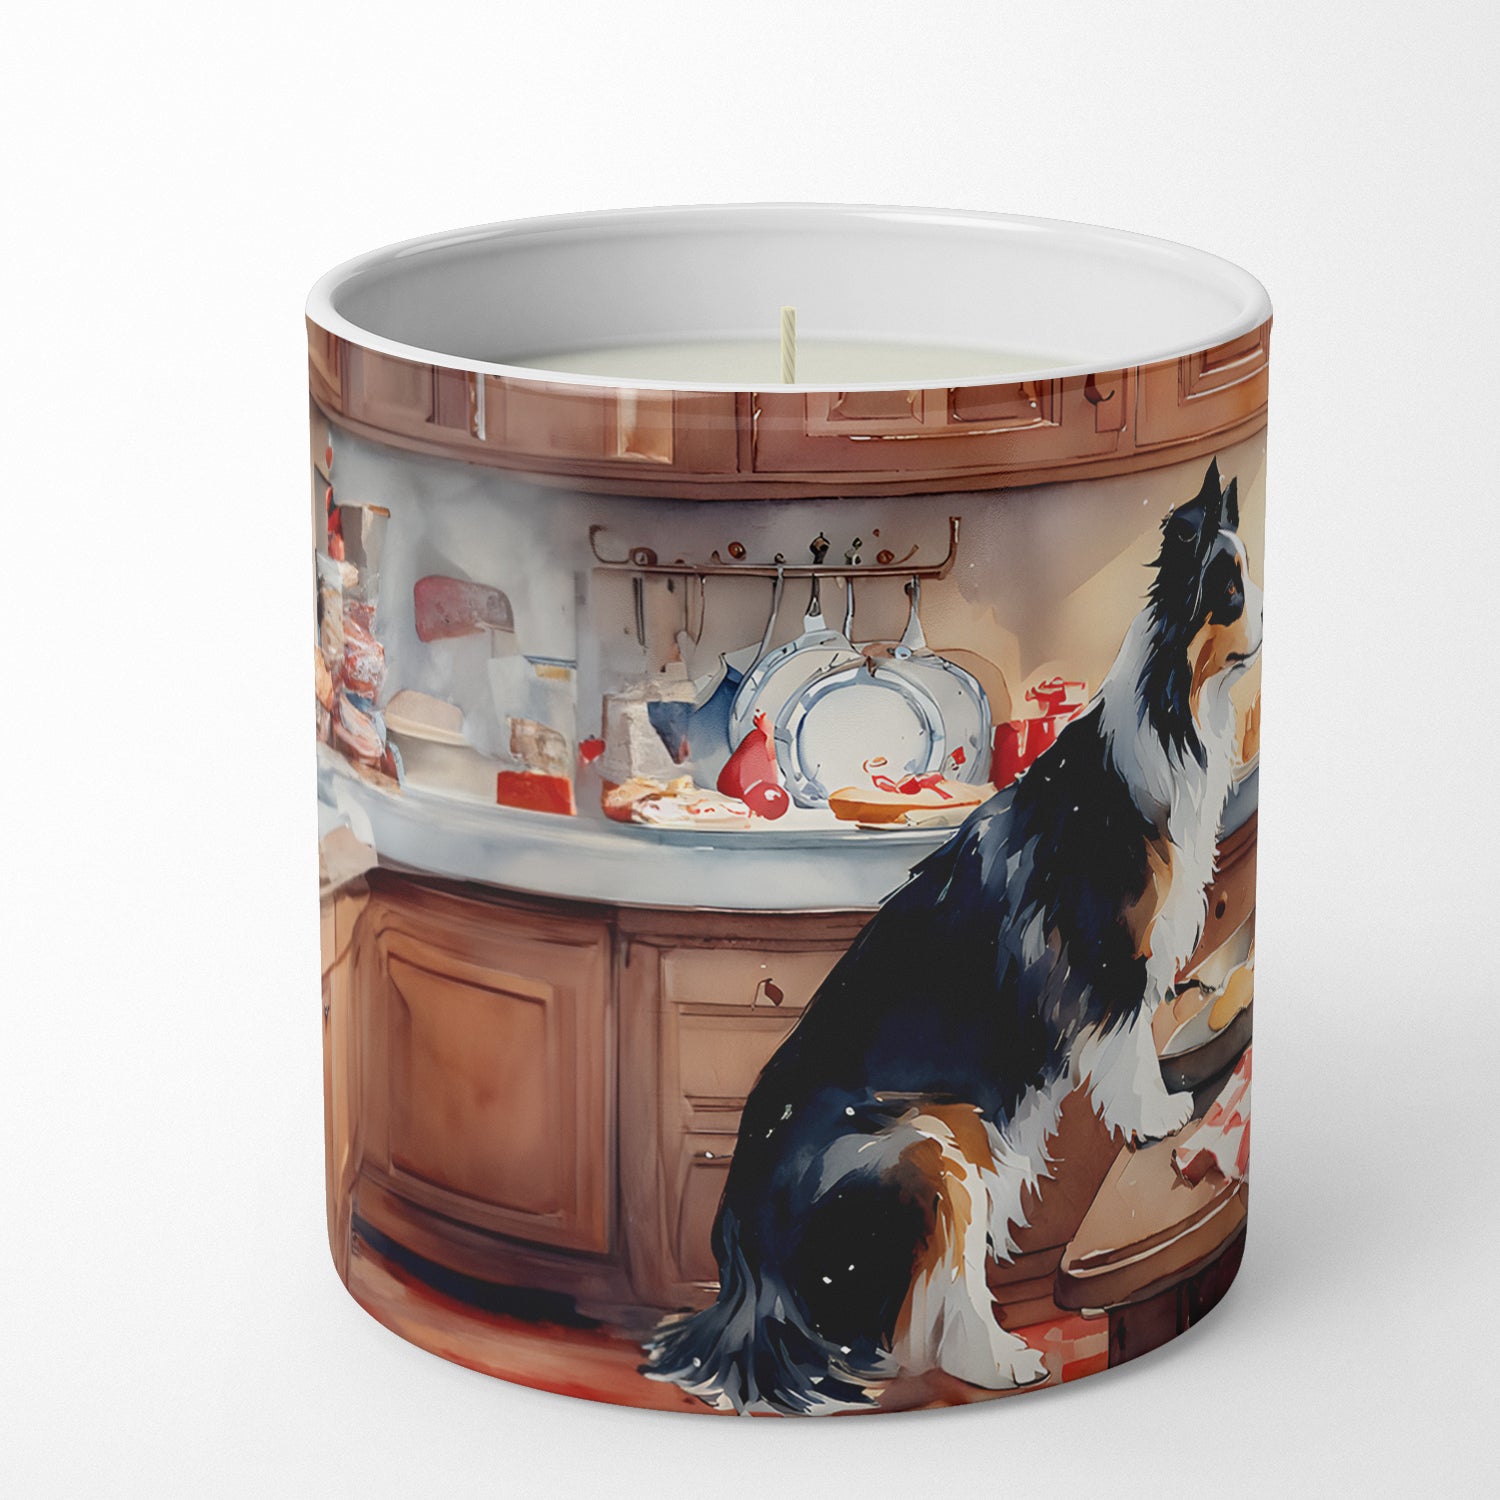 Border Collie Christmas Cookies Decorative Soy Candle